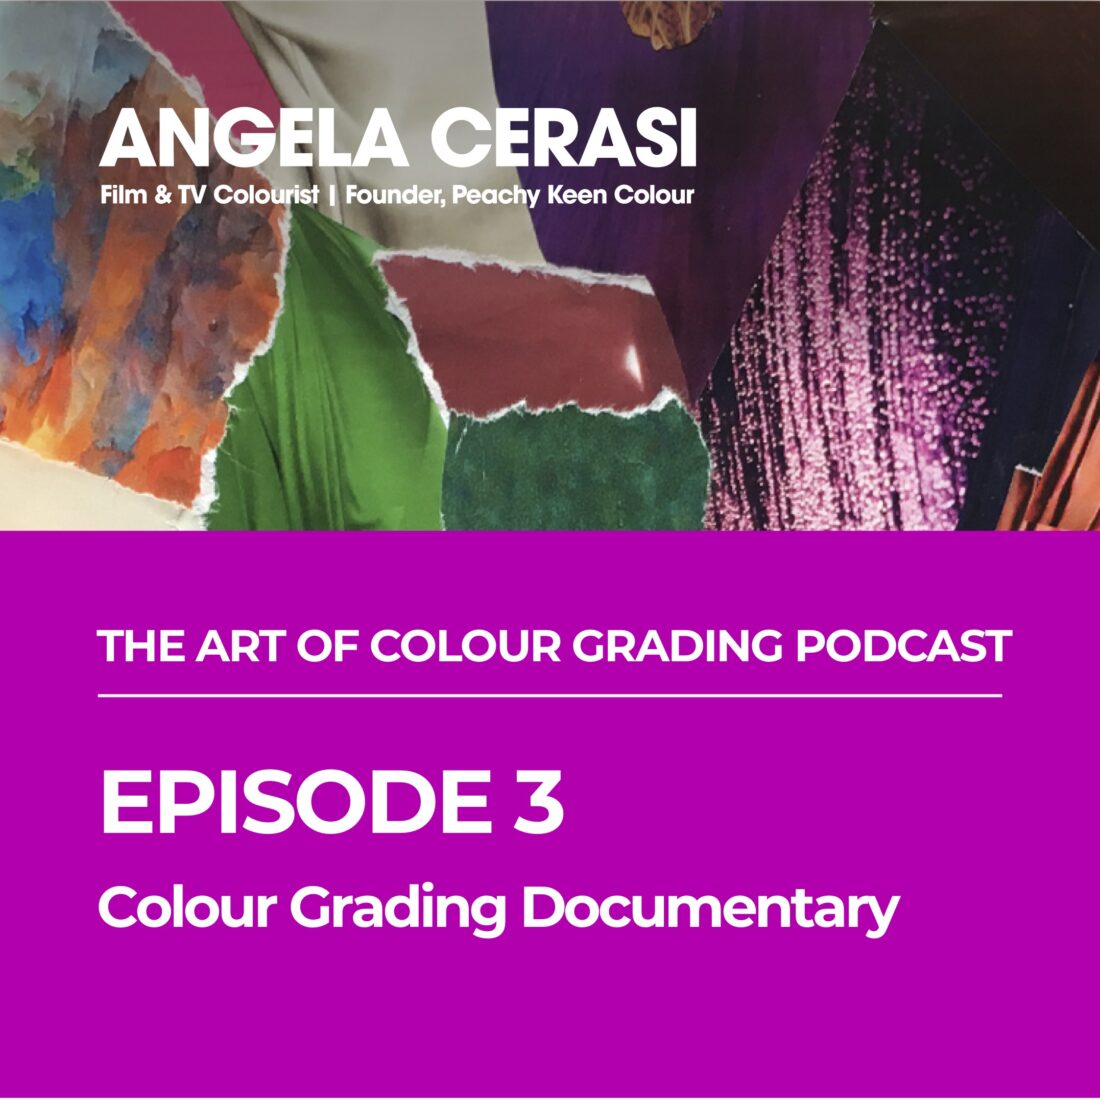 Angela Cerasi's podcast episode about colour grading documentary